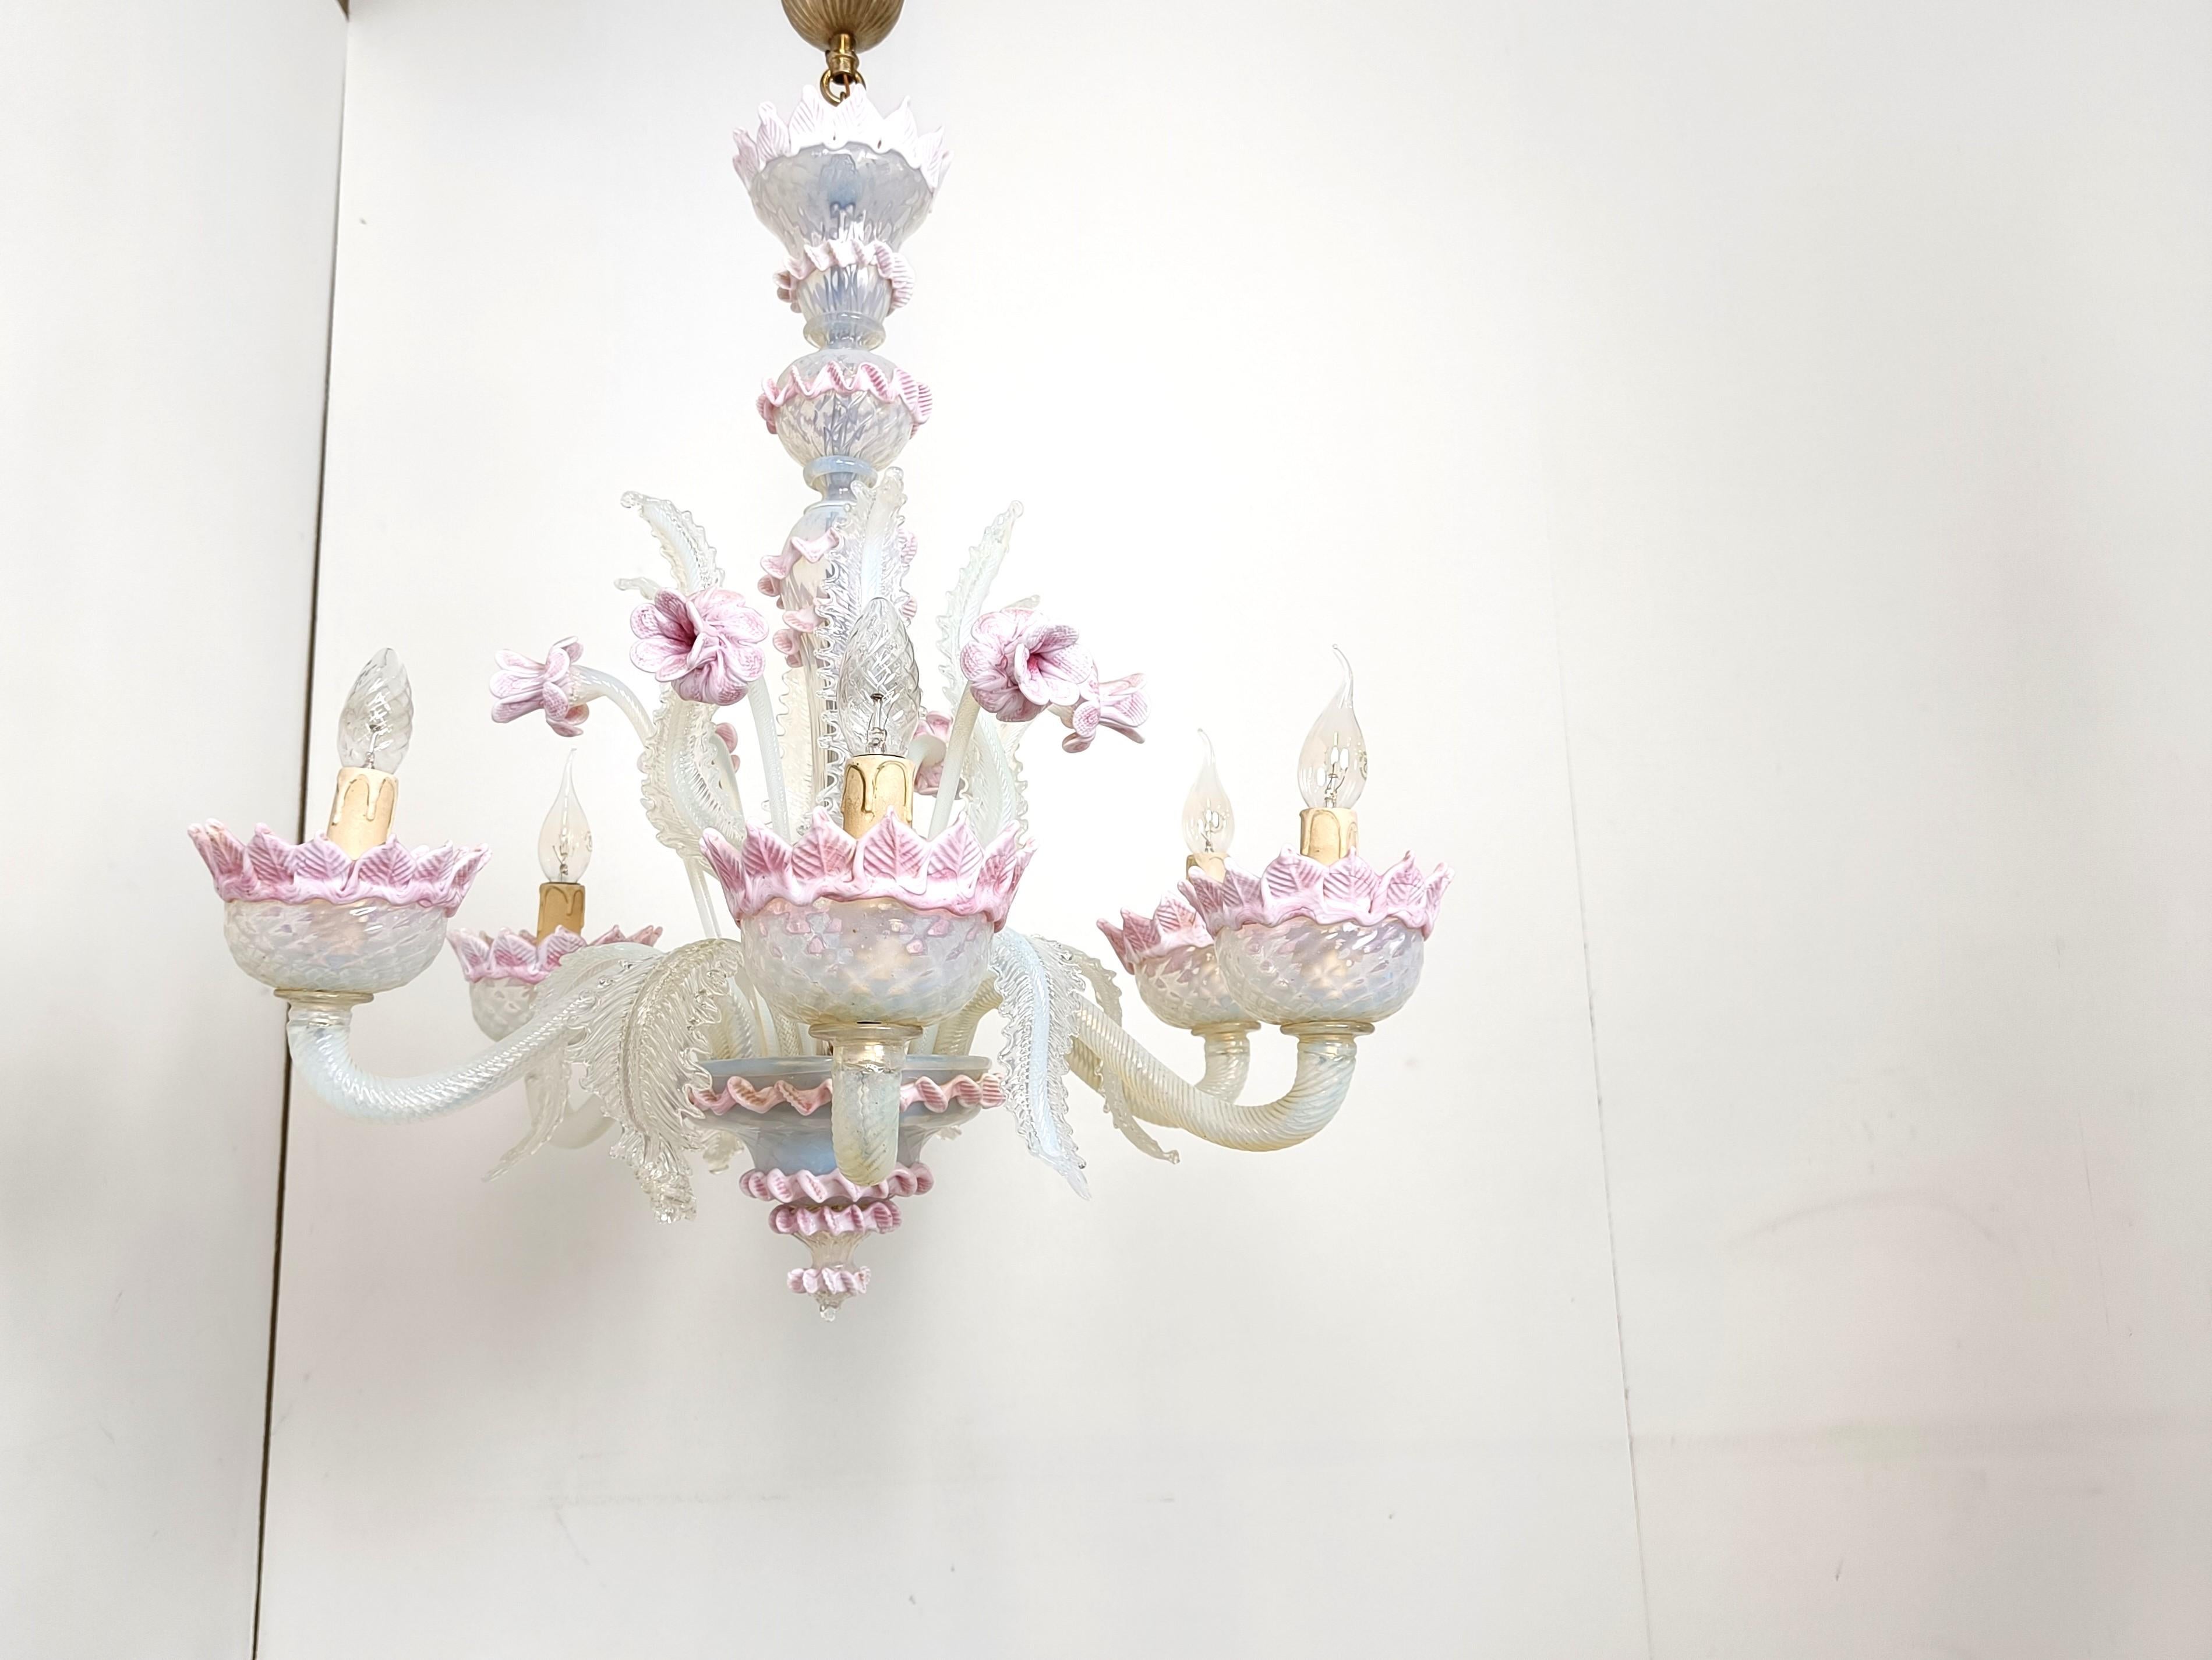 Vintage floral murano glass chandelier, 1950s For Sale 3